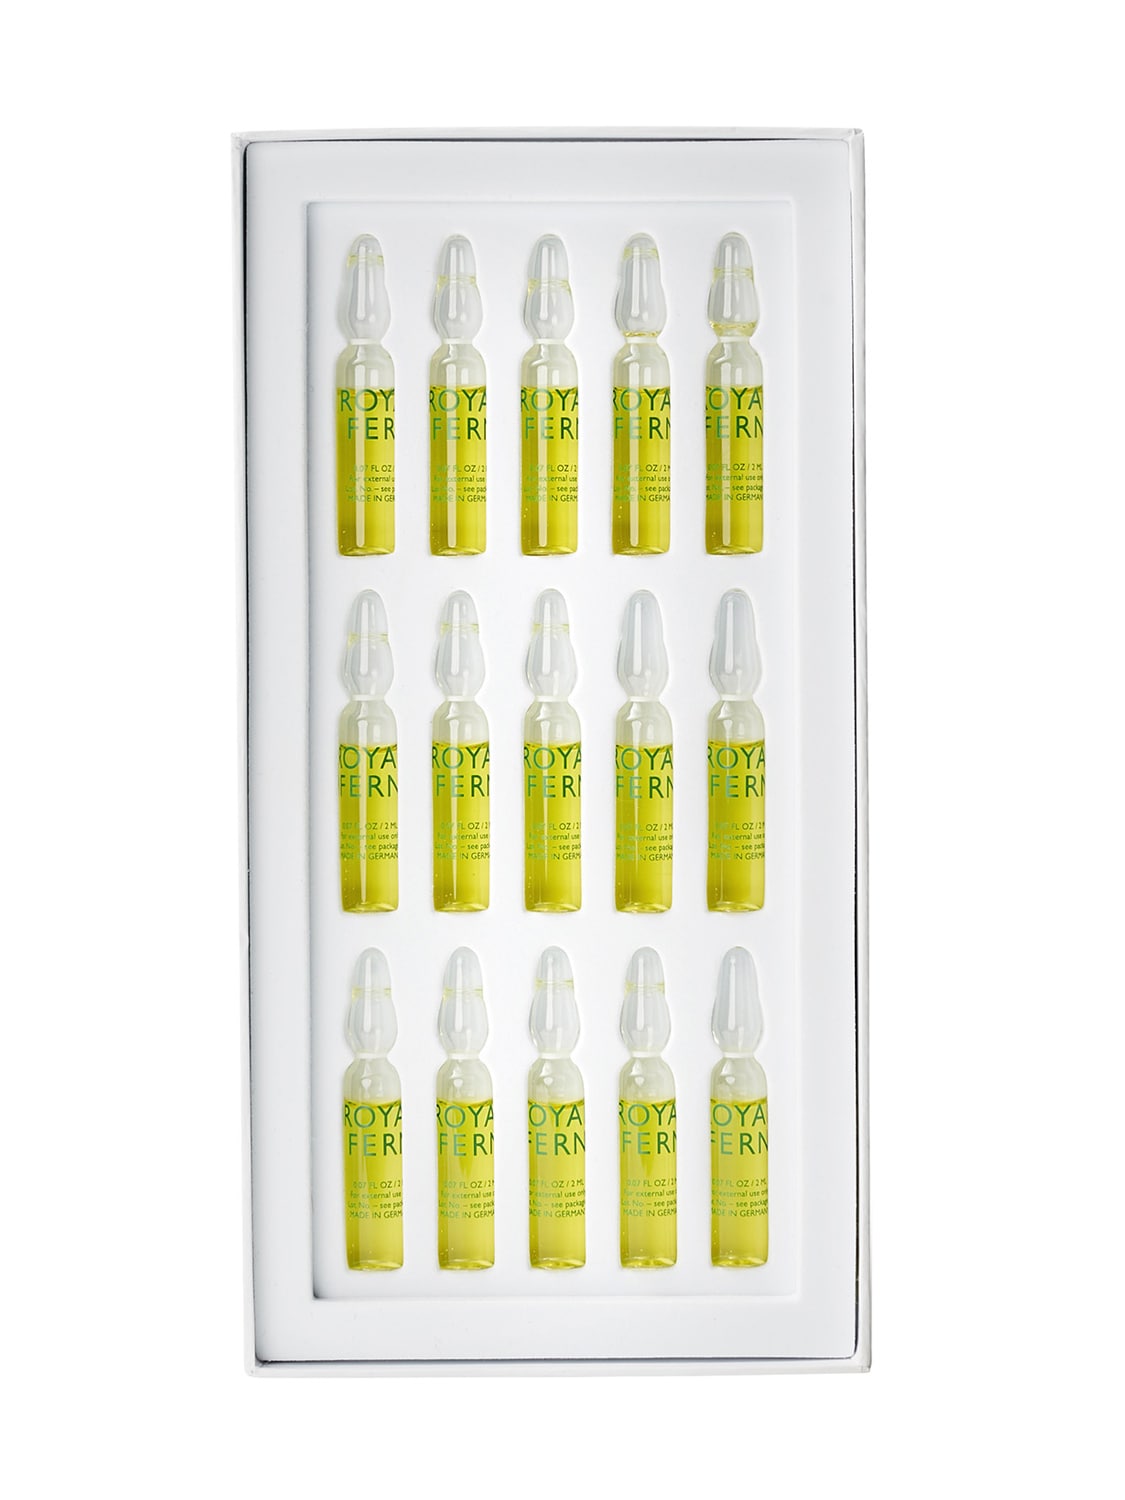 Image of 15 Anti-oxidative Ampoules